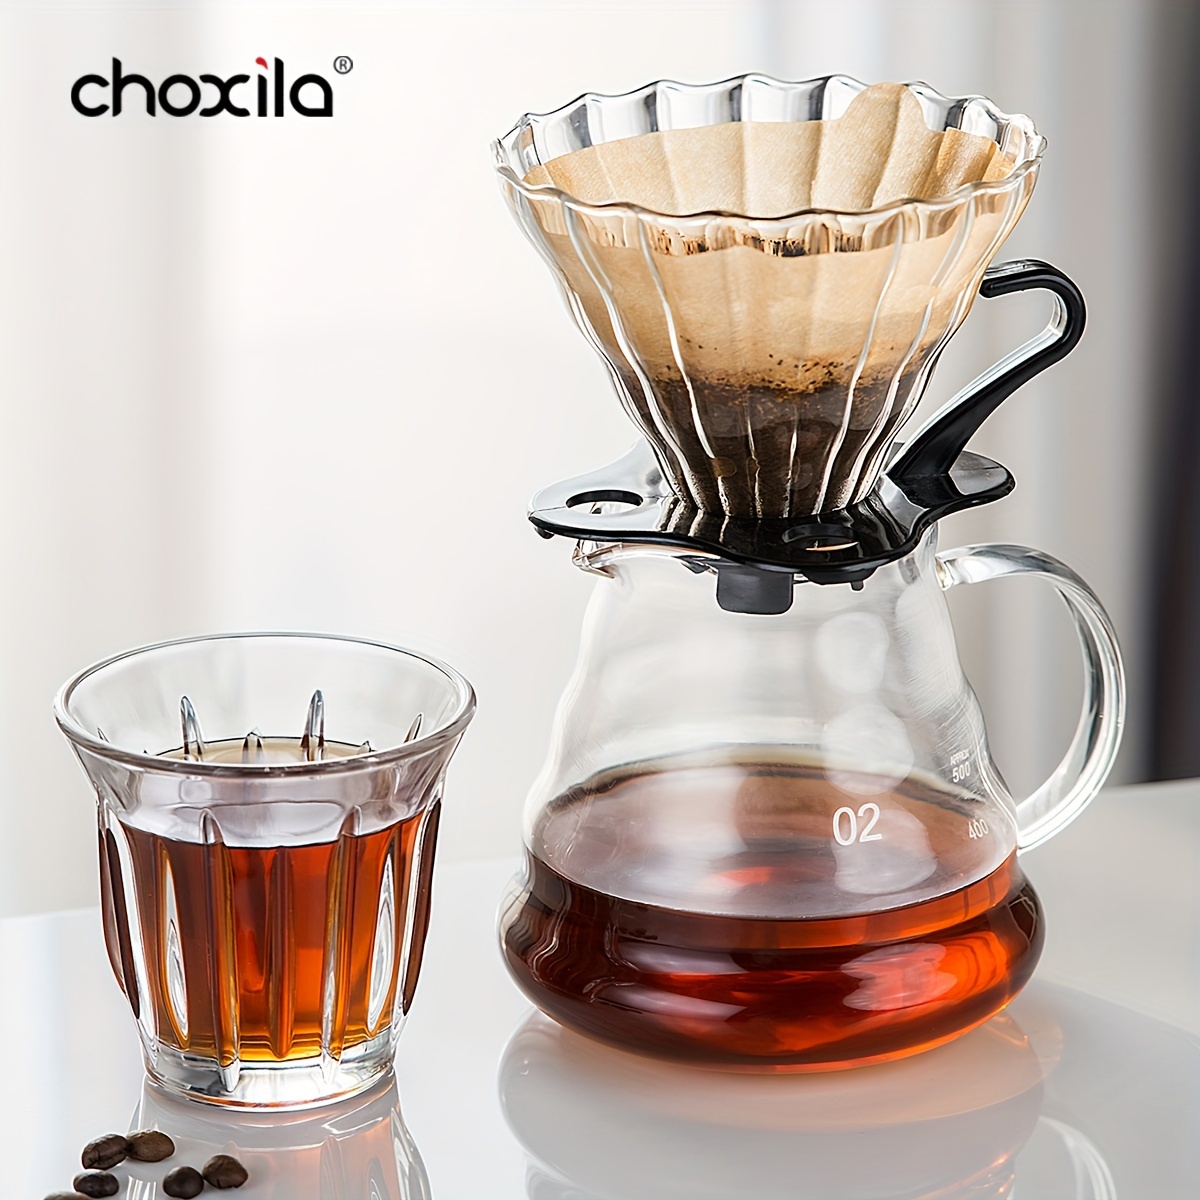 Pour over Coffee Brewer, Glass Coffee Pot, Glass Portable Pour over Coffee  Maker, Coffee Dripper Brewer, for Birthday Gifts party kitchen 